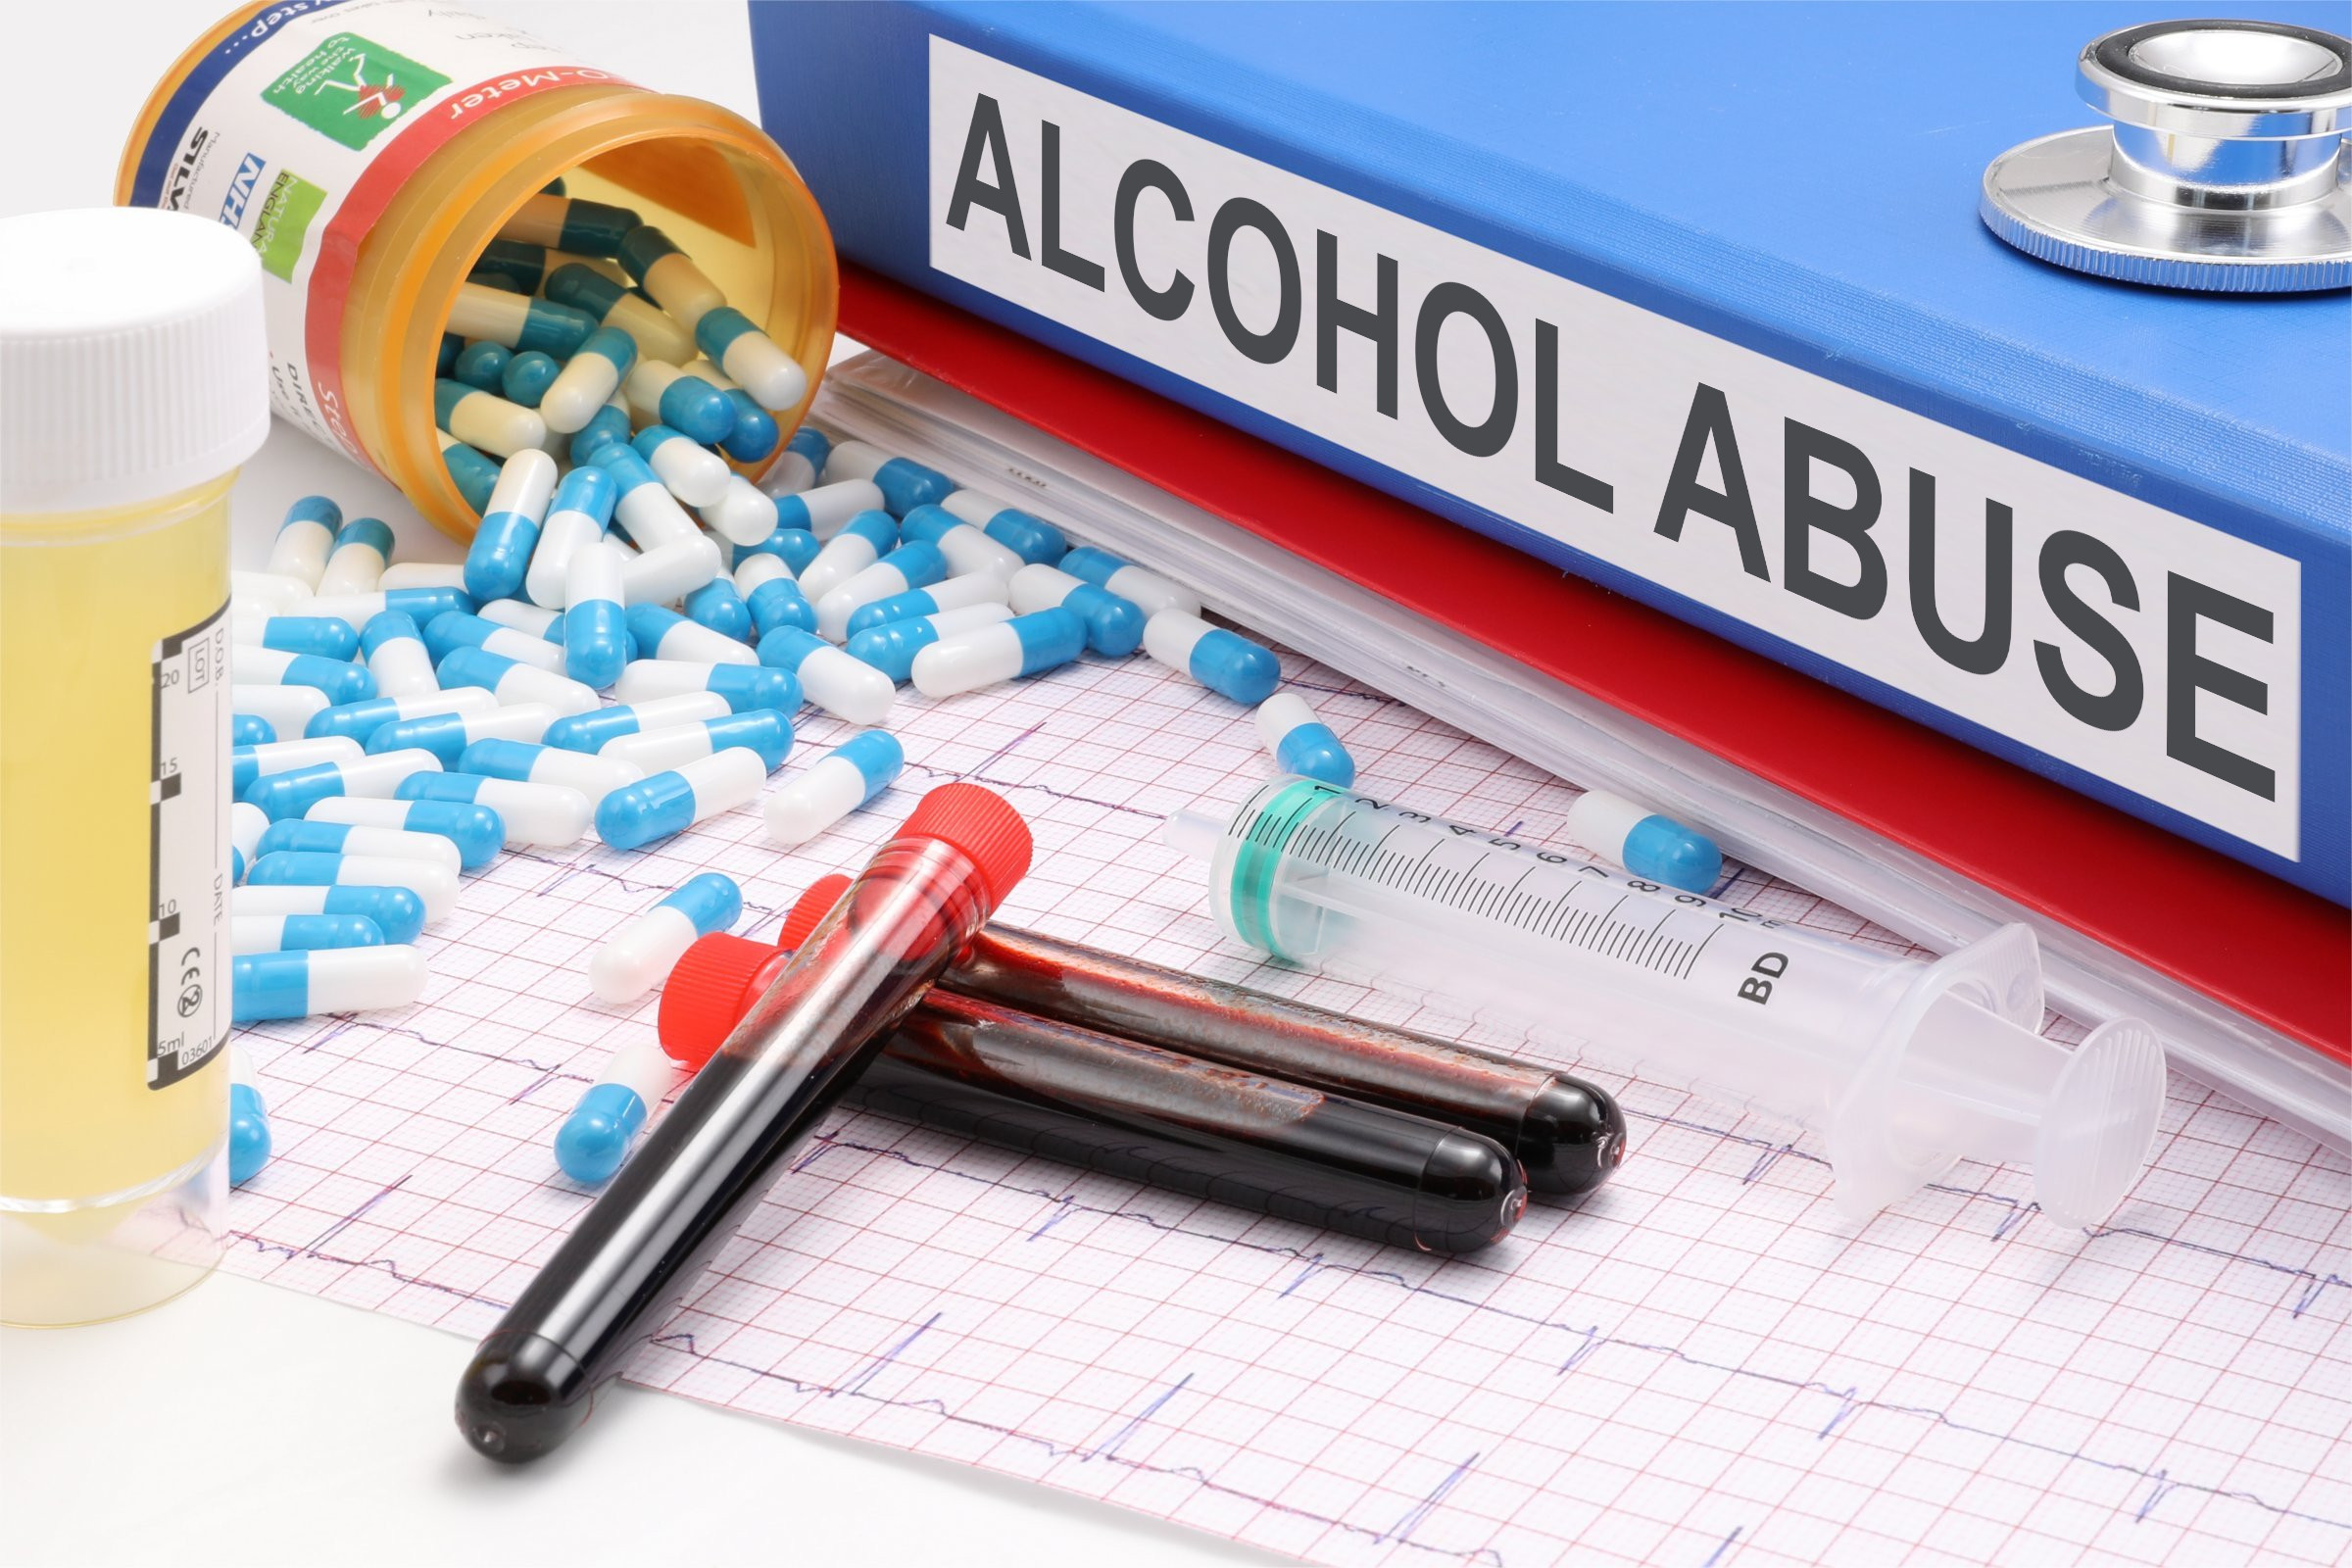 Drug Addiction Treatment Principles and Tips for Preventing Substance Abuse